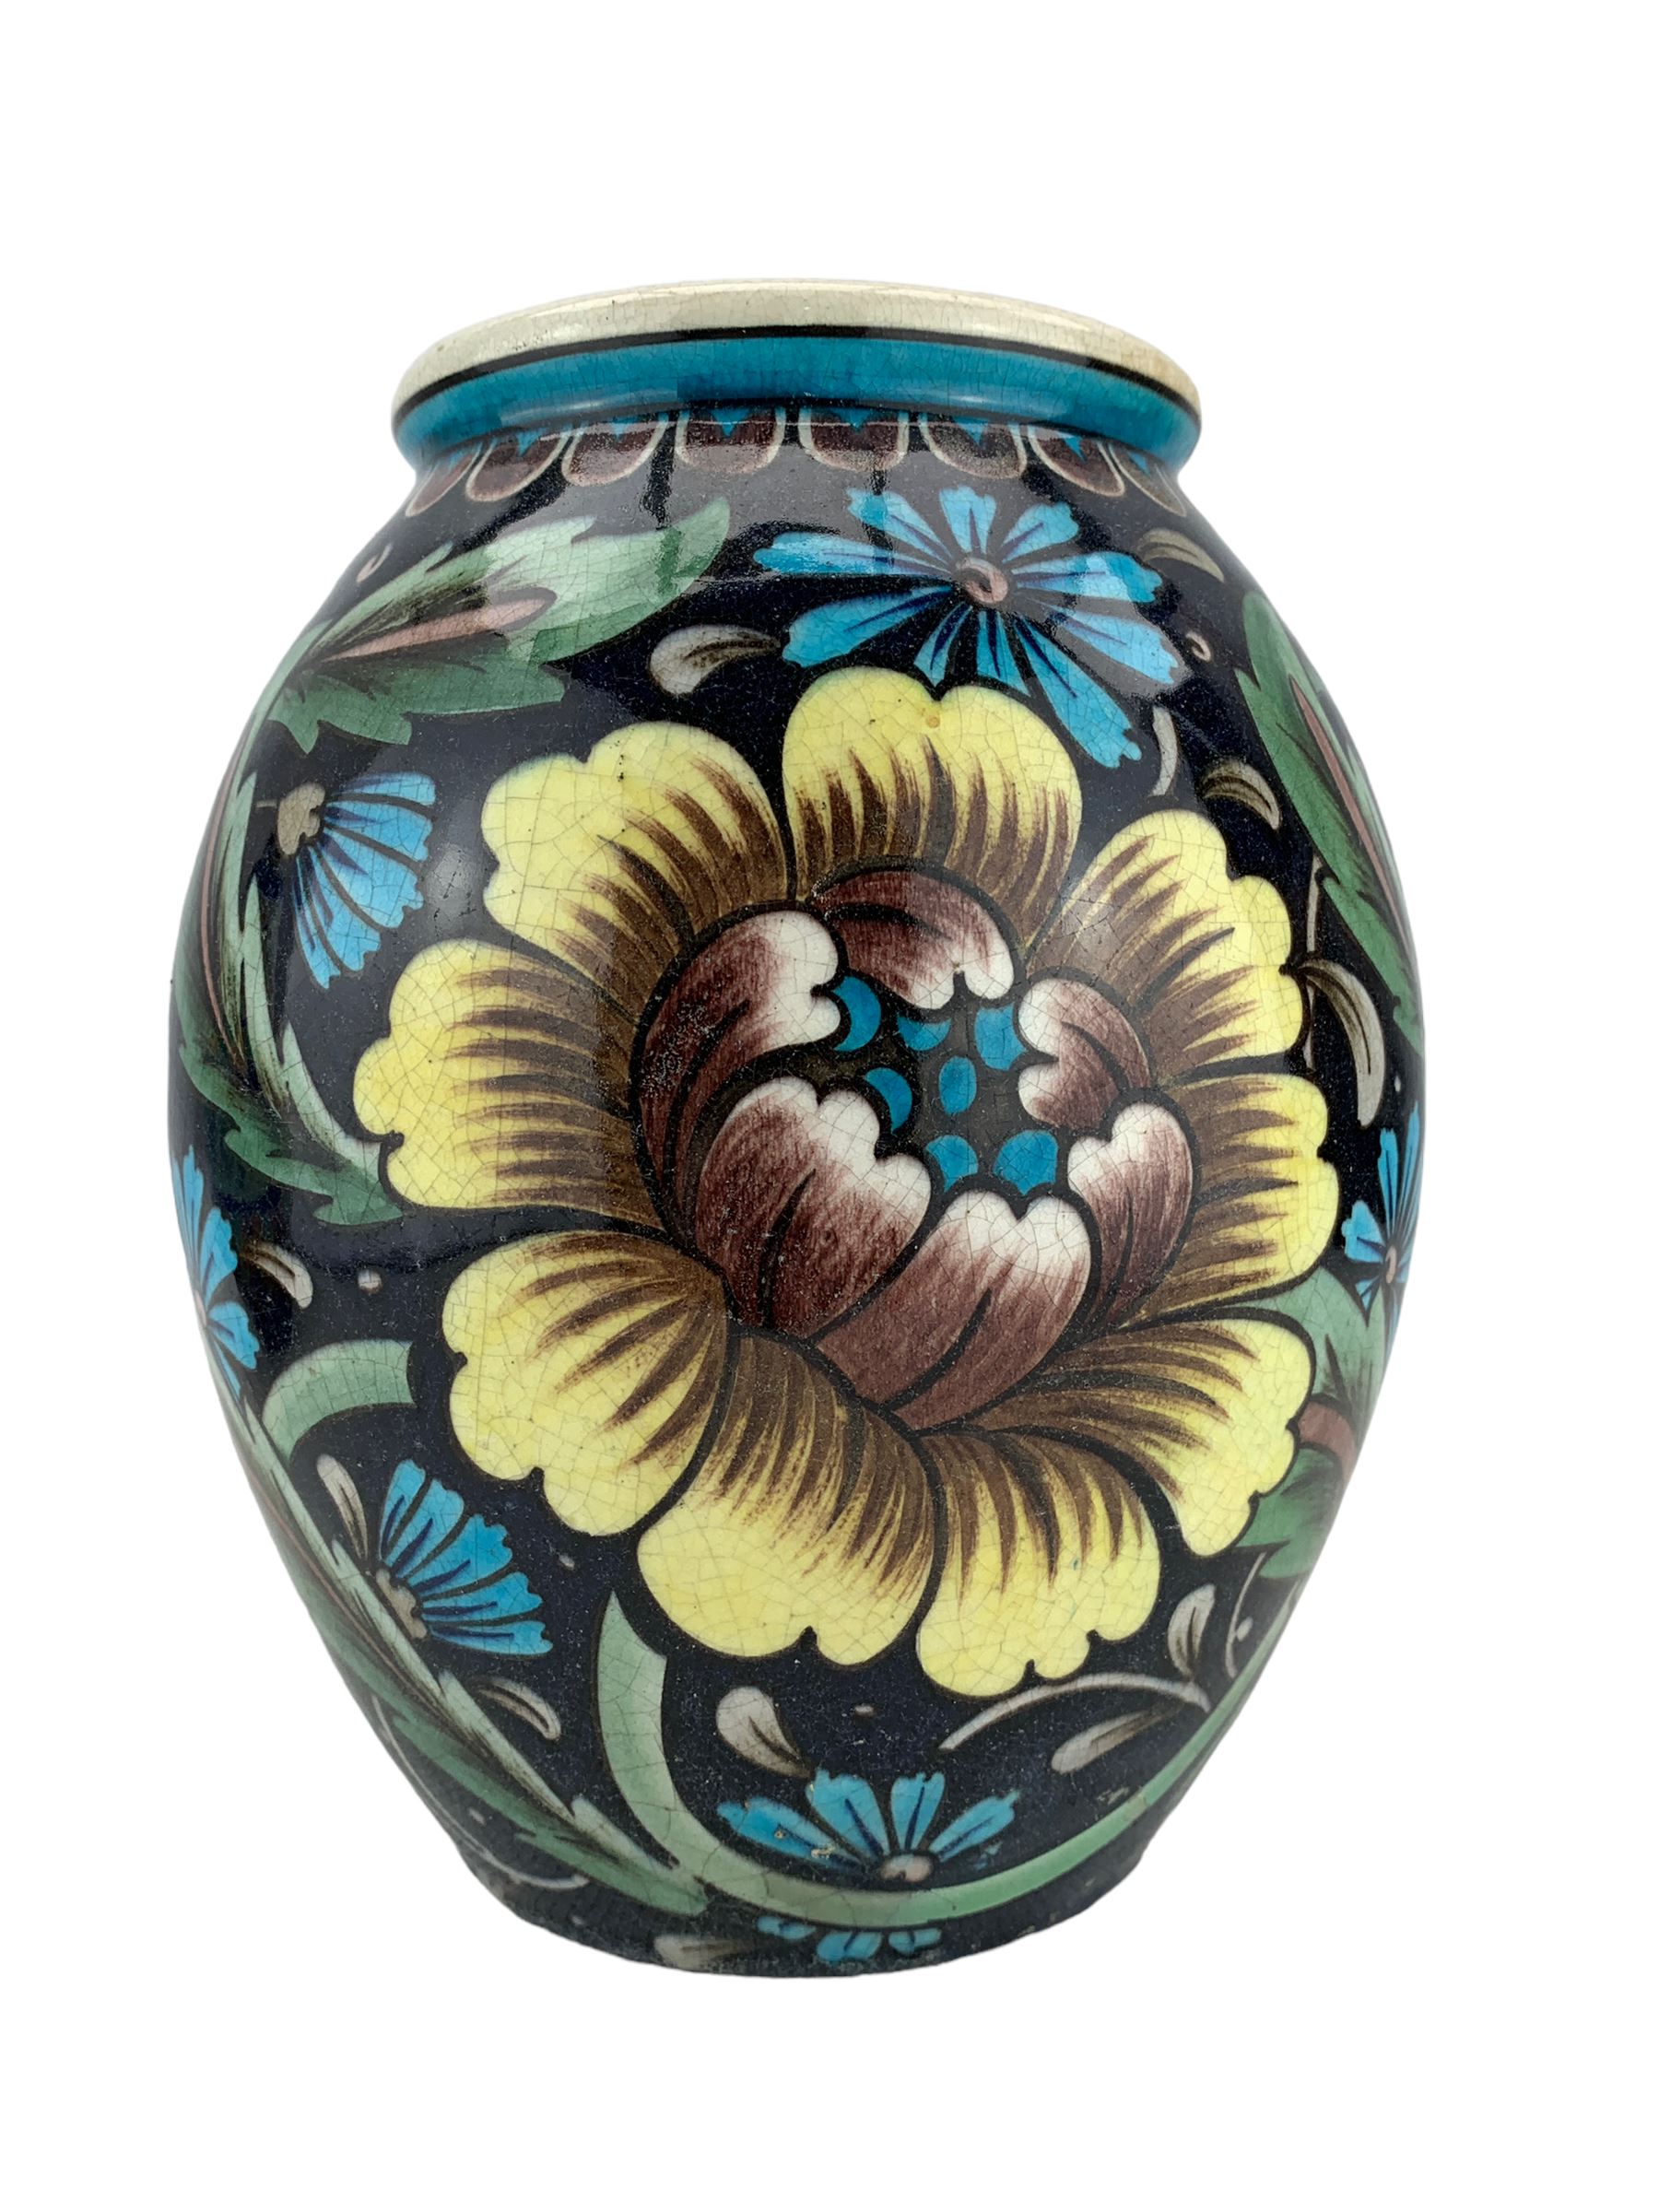 Burmantofts Faience Anglo-Persian vase - Image 2 of 6